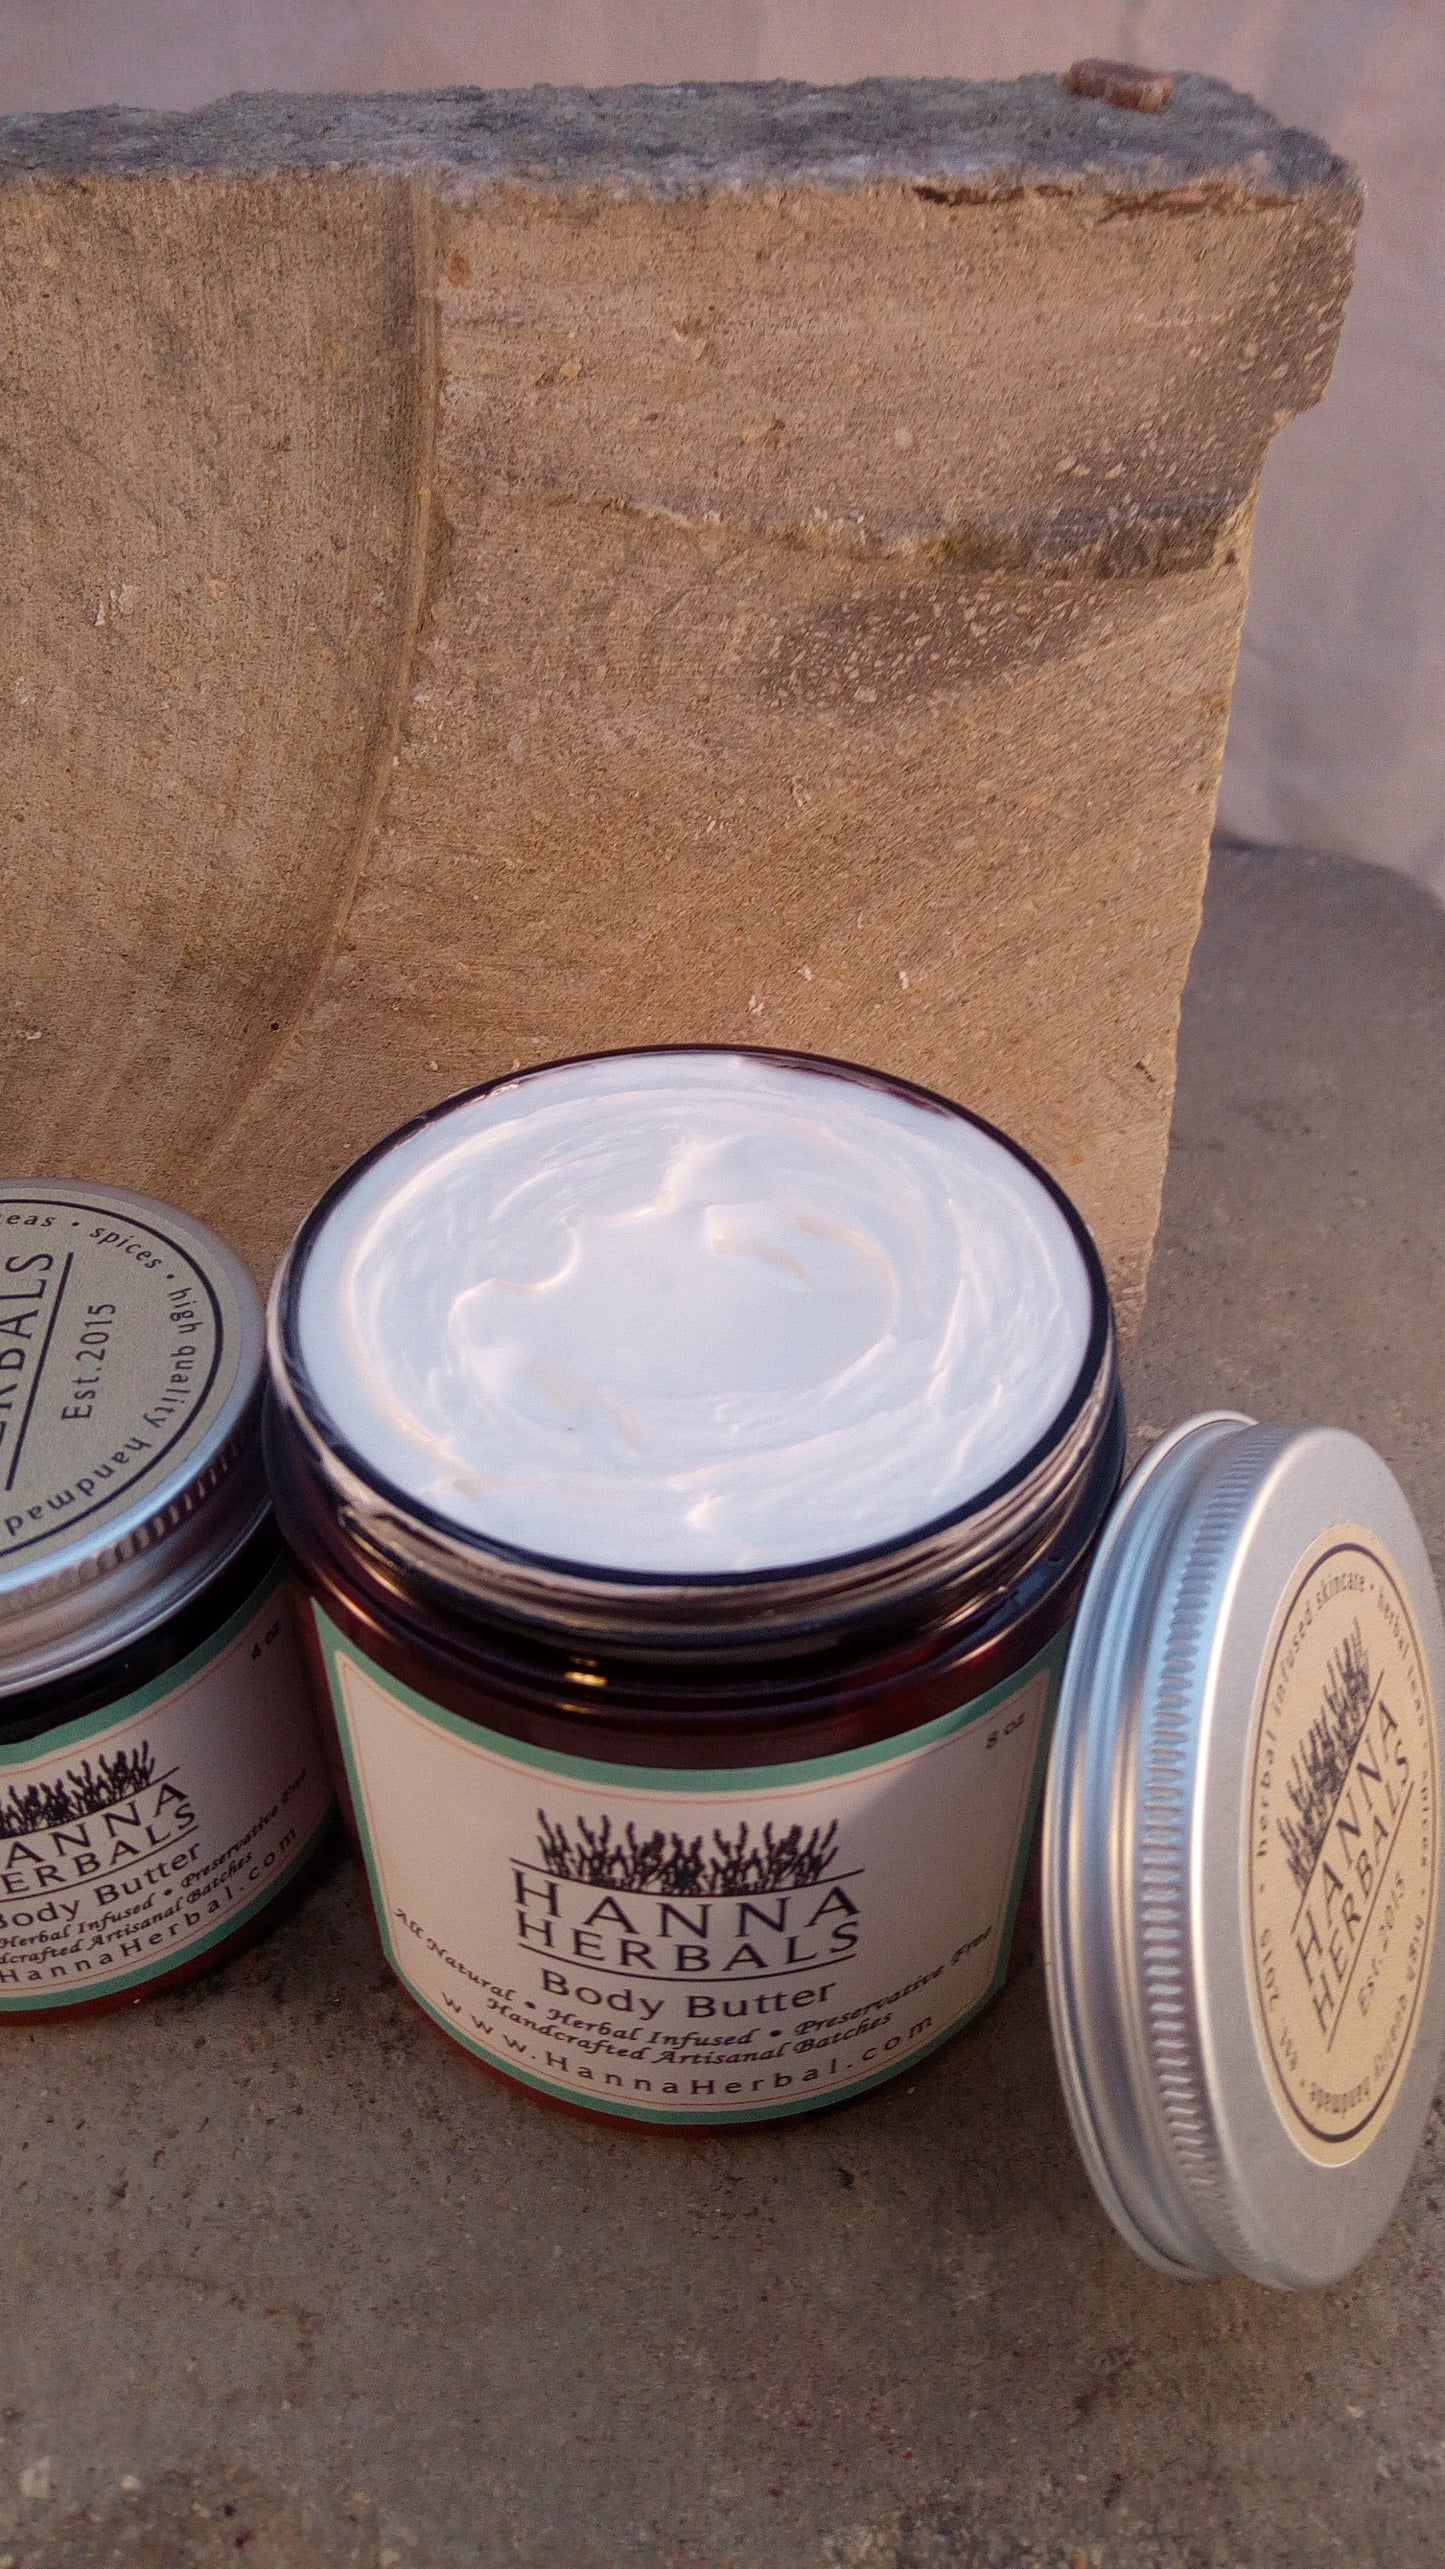 Frankincense and Myrhh Body Butter - Hanna Herbals